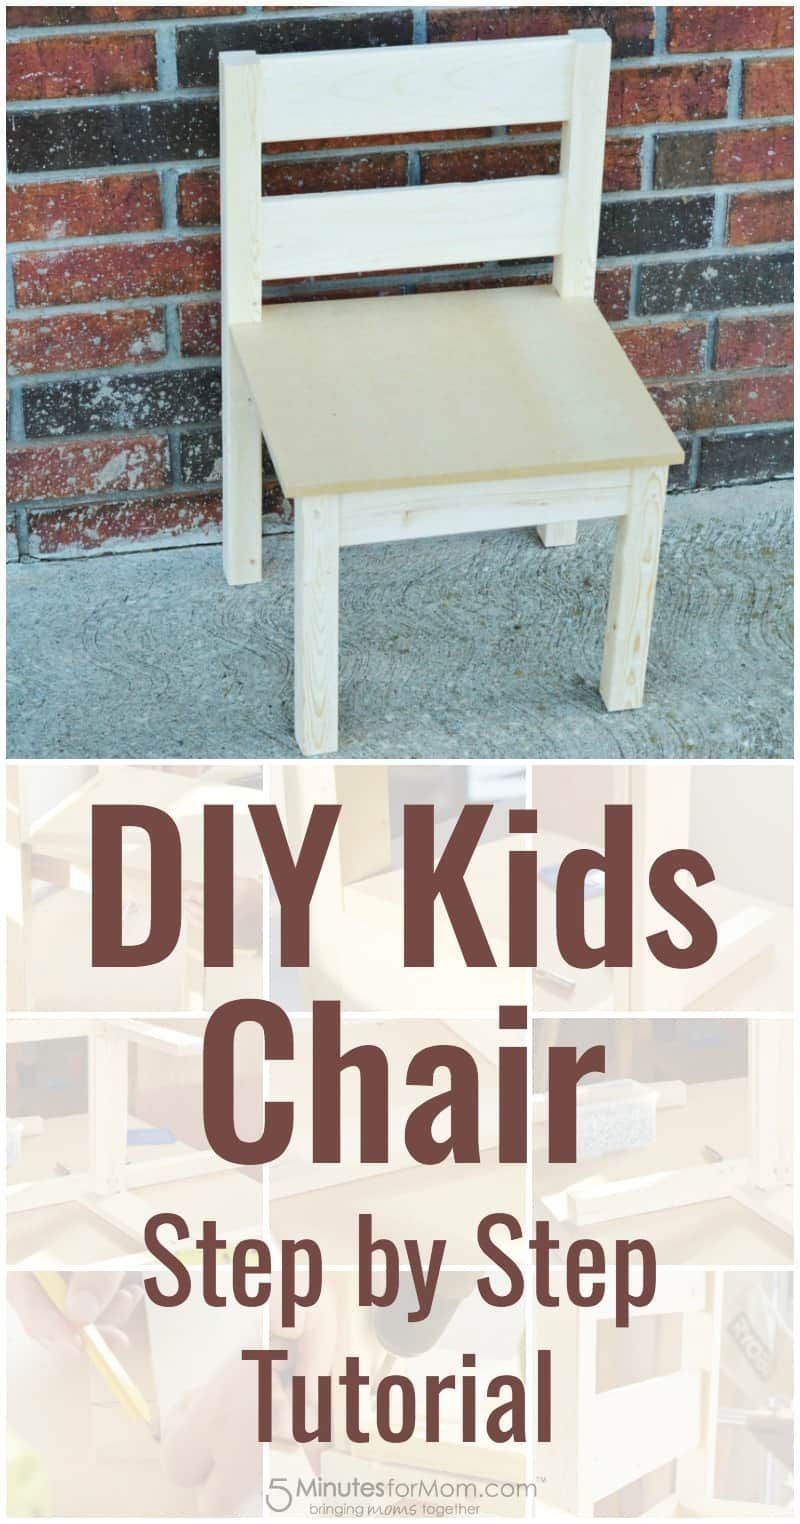 DIY Kids Chair – How To Build A Kids Chair For Beginners - DIY Kids Chair – How To Build A Kids Chair For Beginners -   diy Kids chair